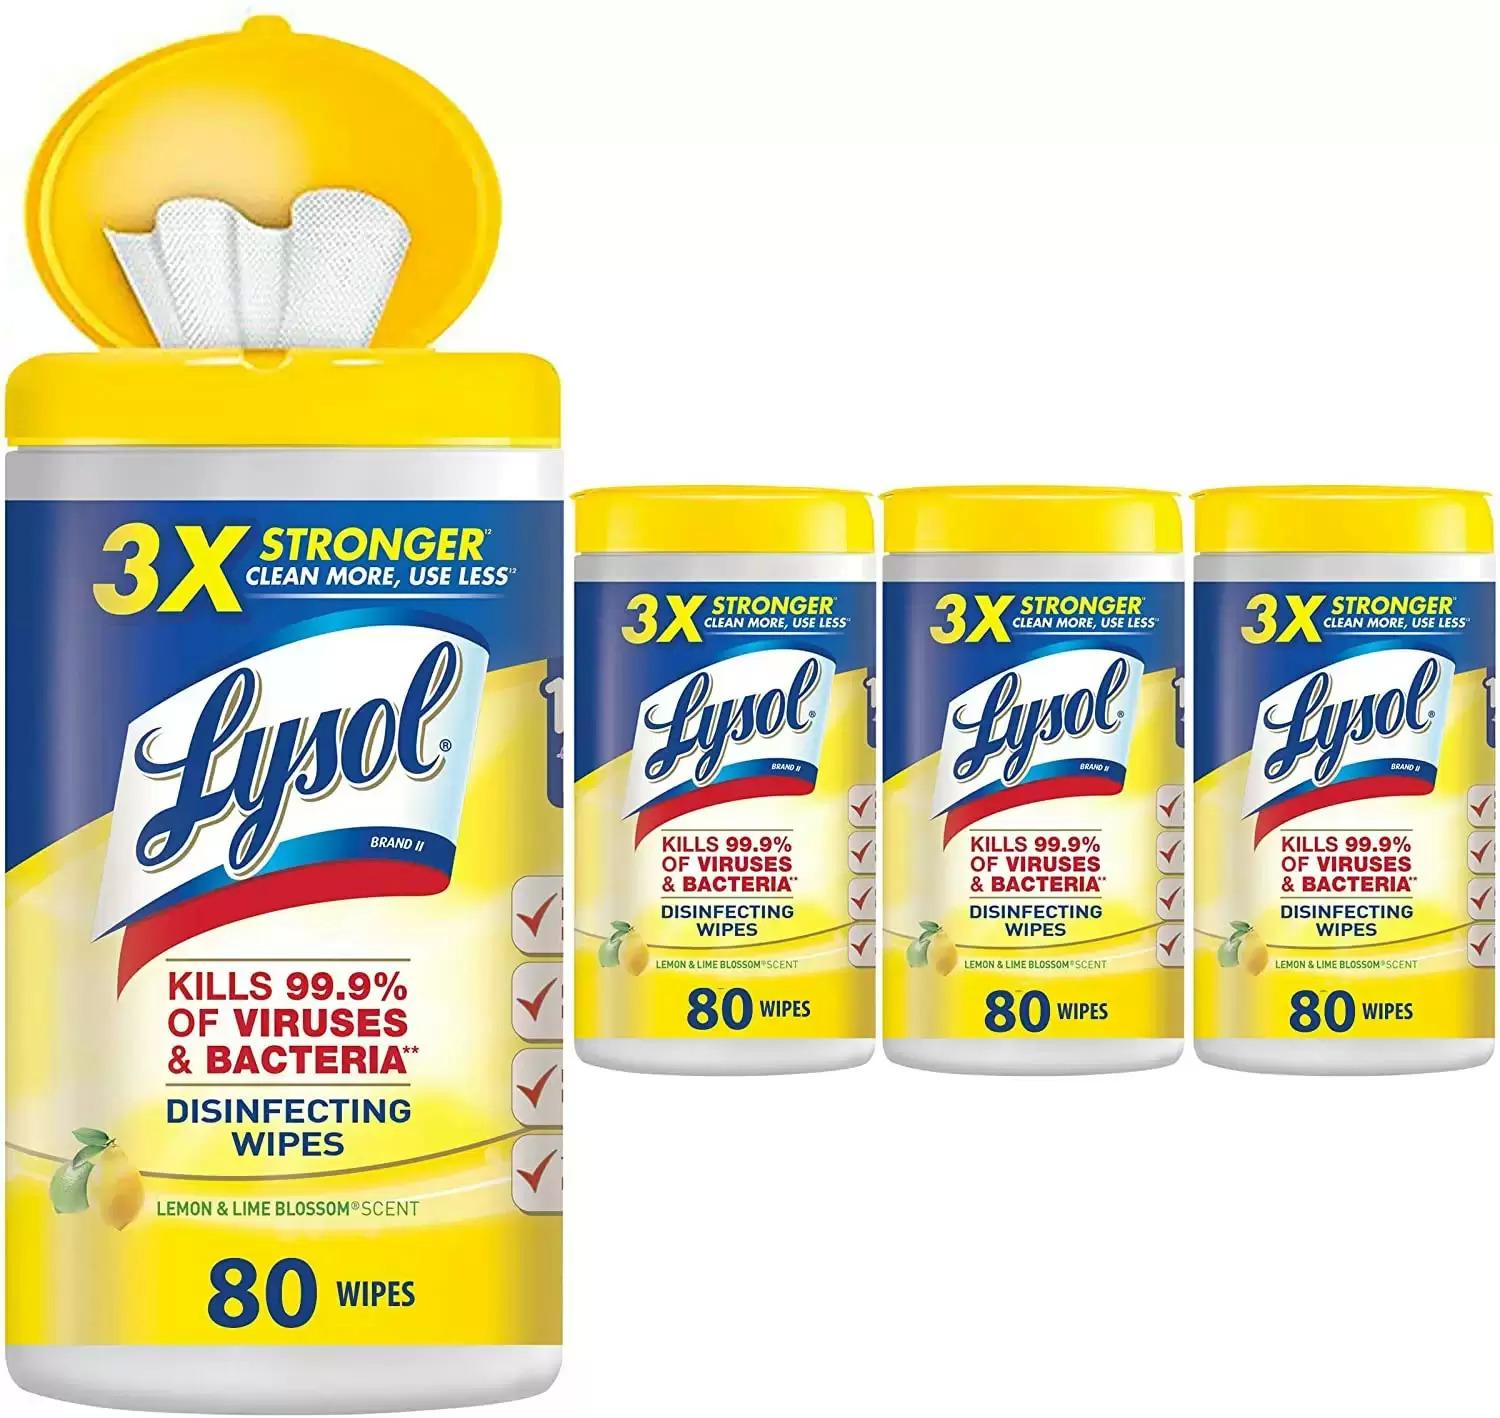 320 Lysol Disinfecting Wipes for $9.21 Shipped